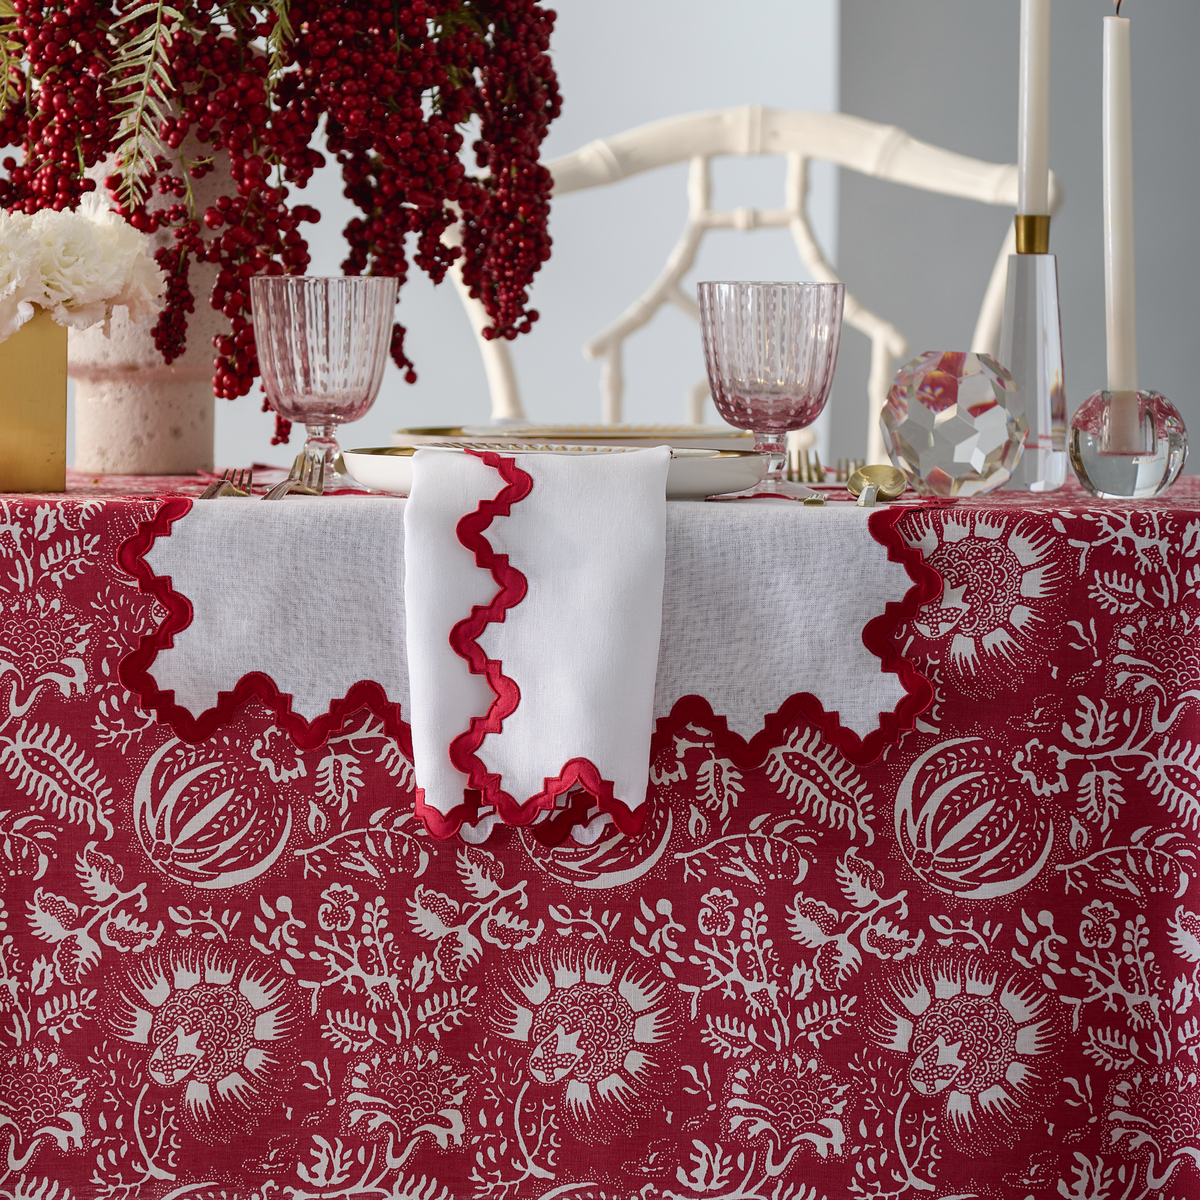 Lifestyle Image of Matouk Granada Table Linens in Scarlet Color